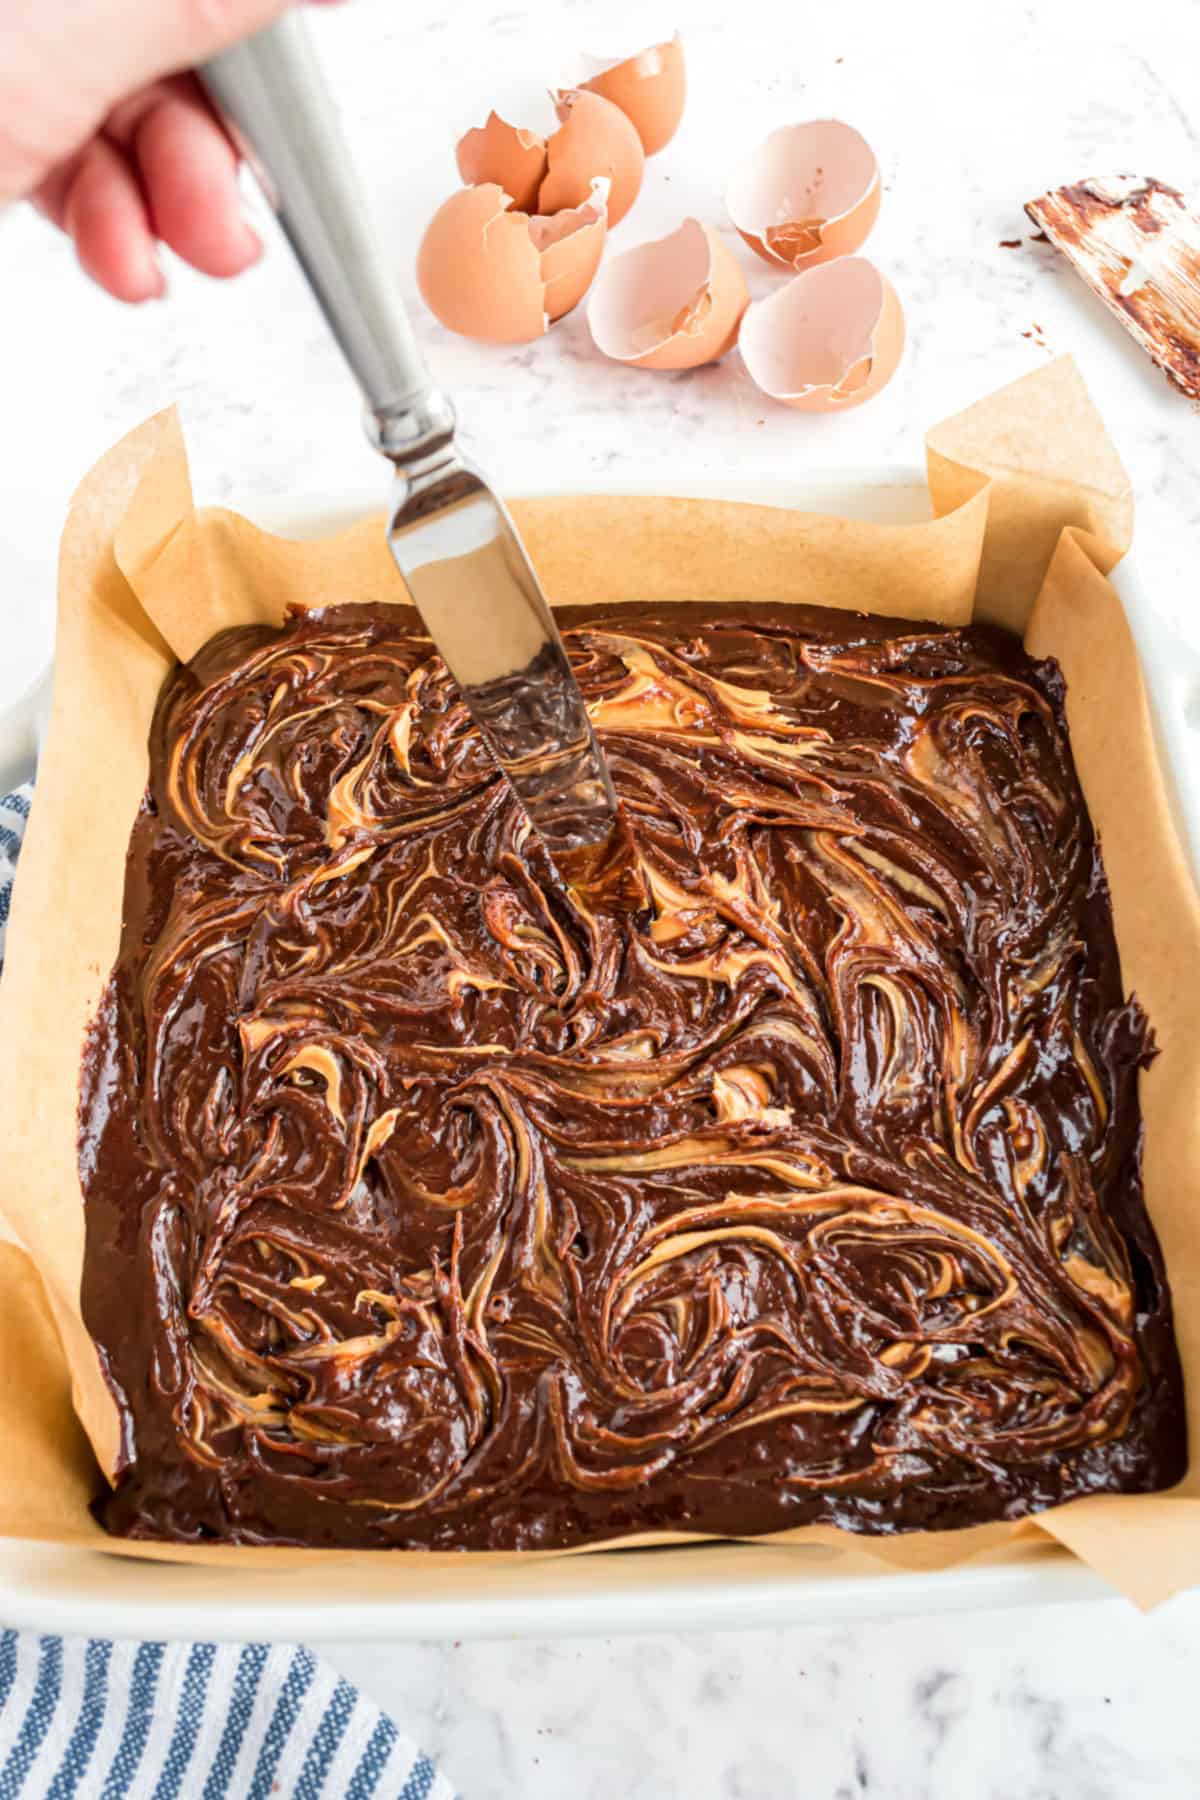 Peanut butter swirled into brownie batter with a knife.